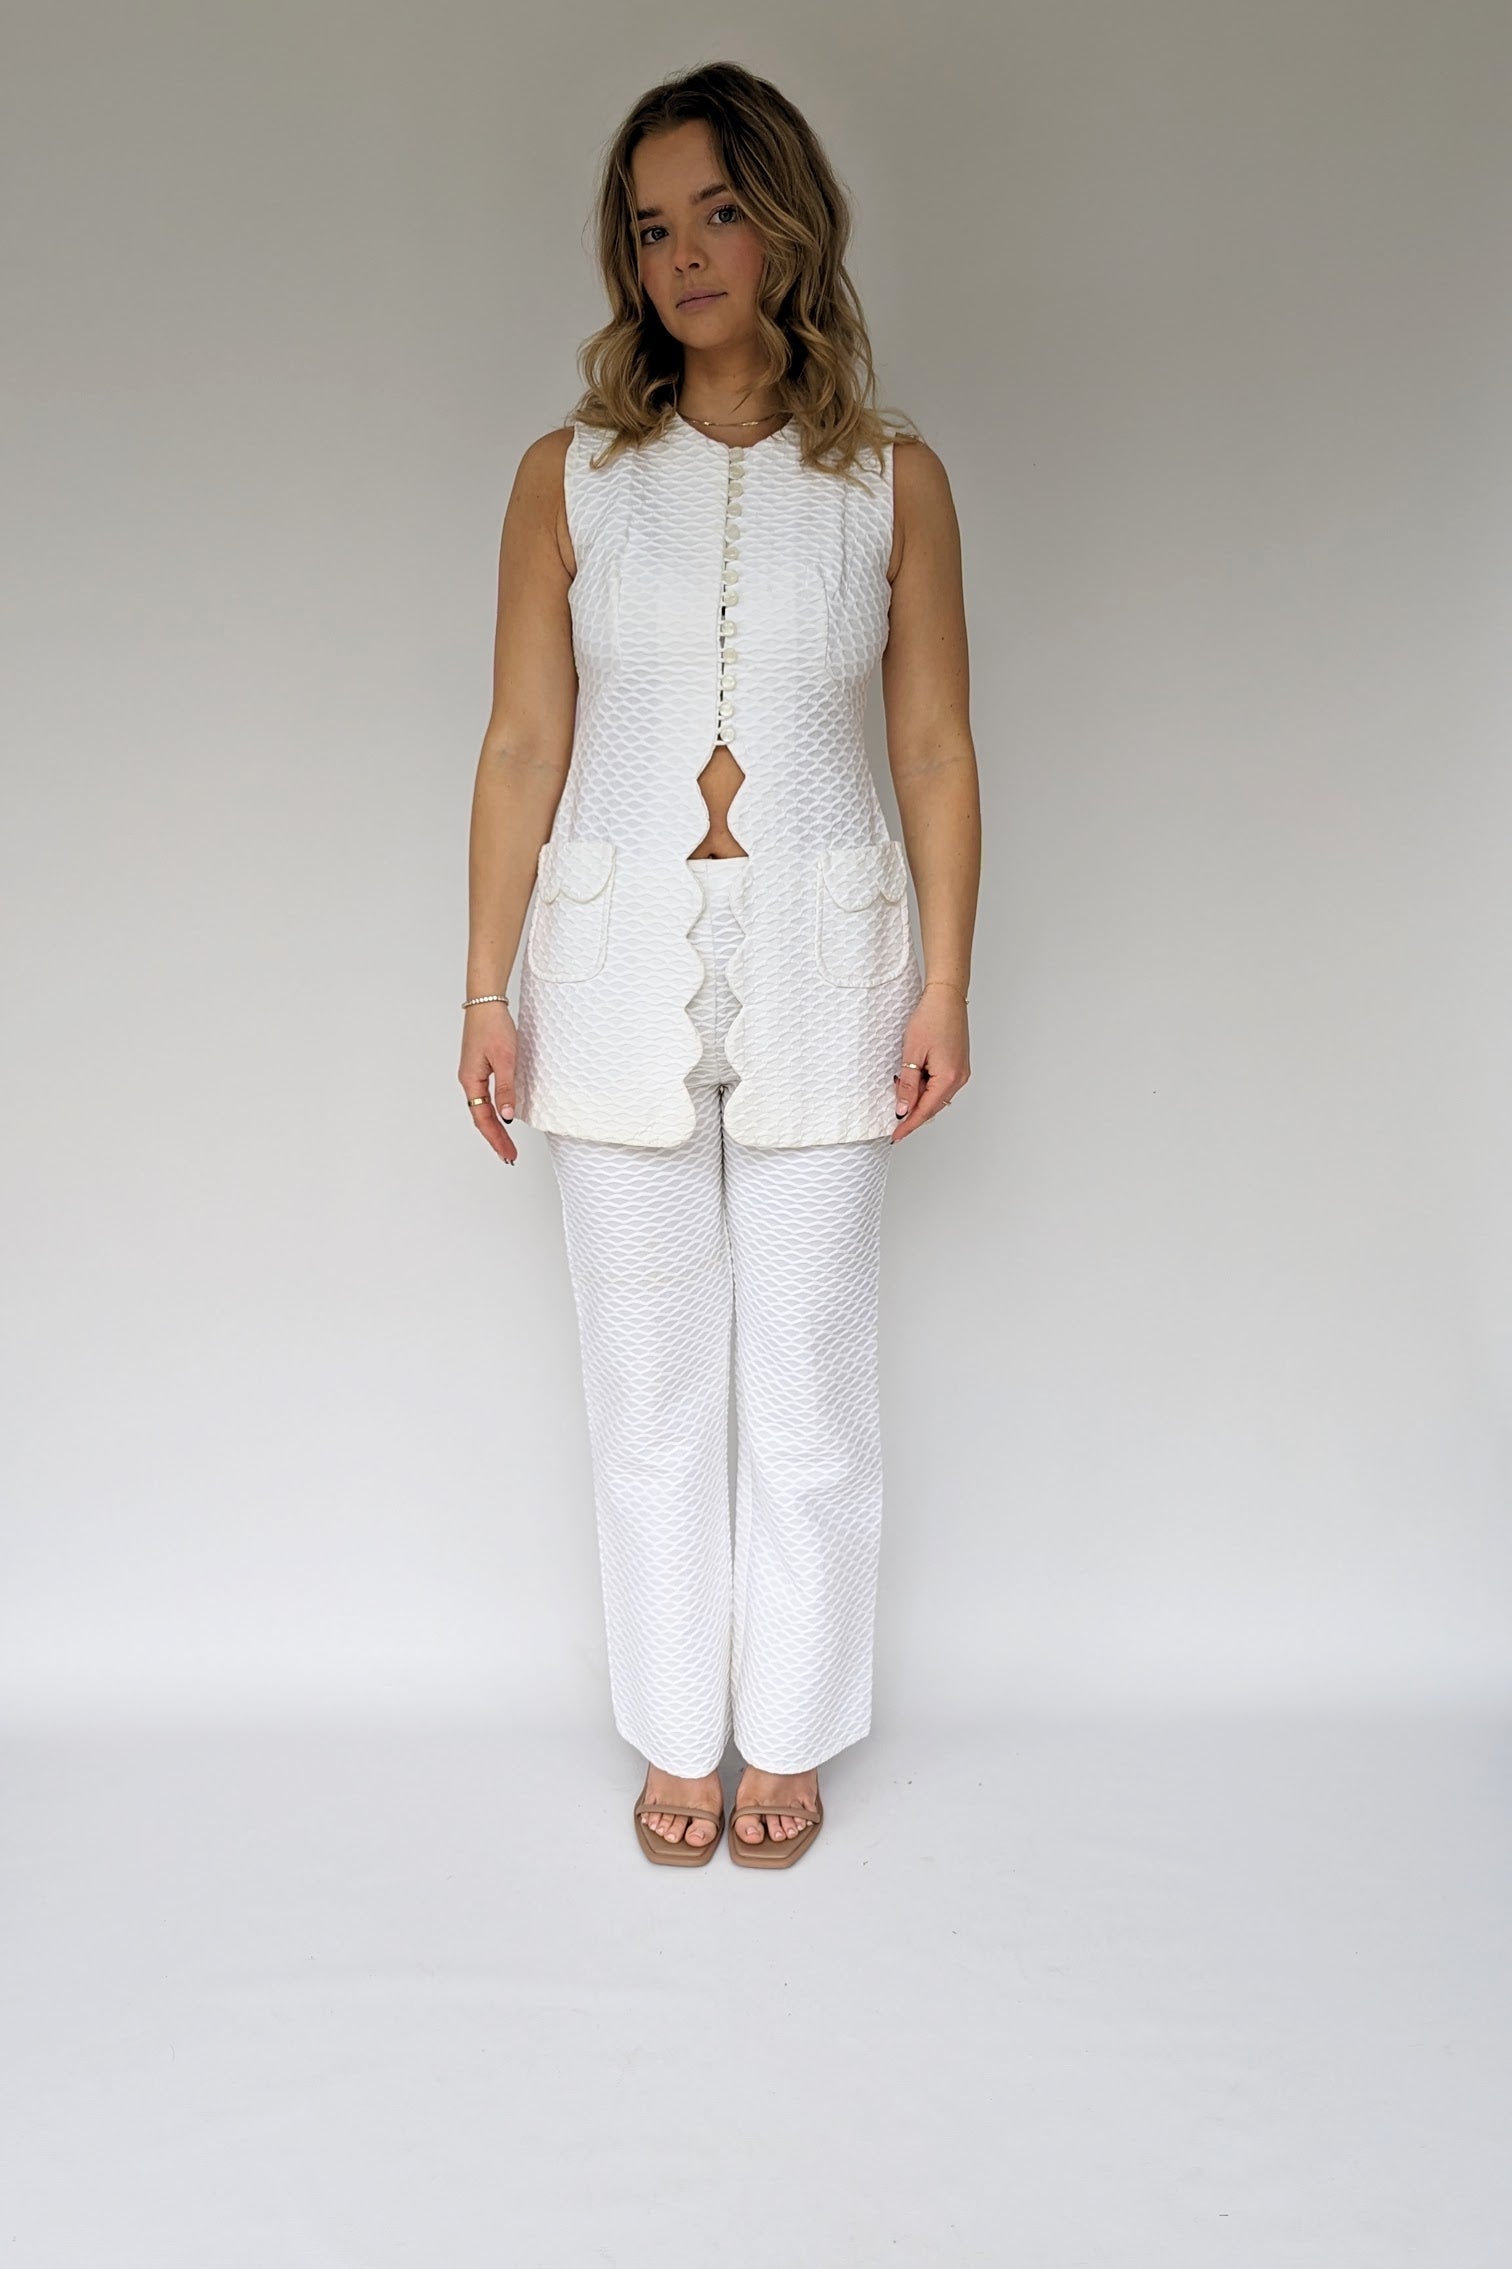 1960s White Pant Suit for wedding